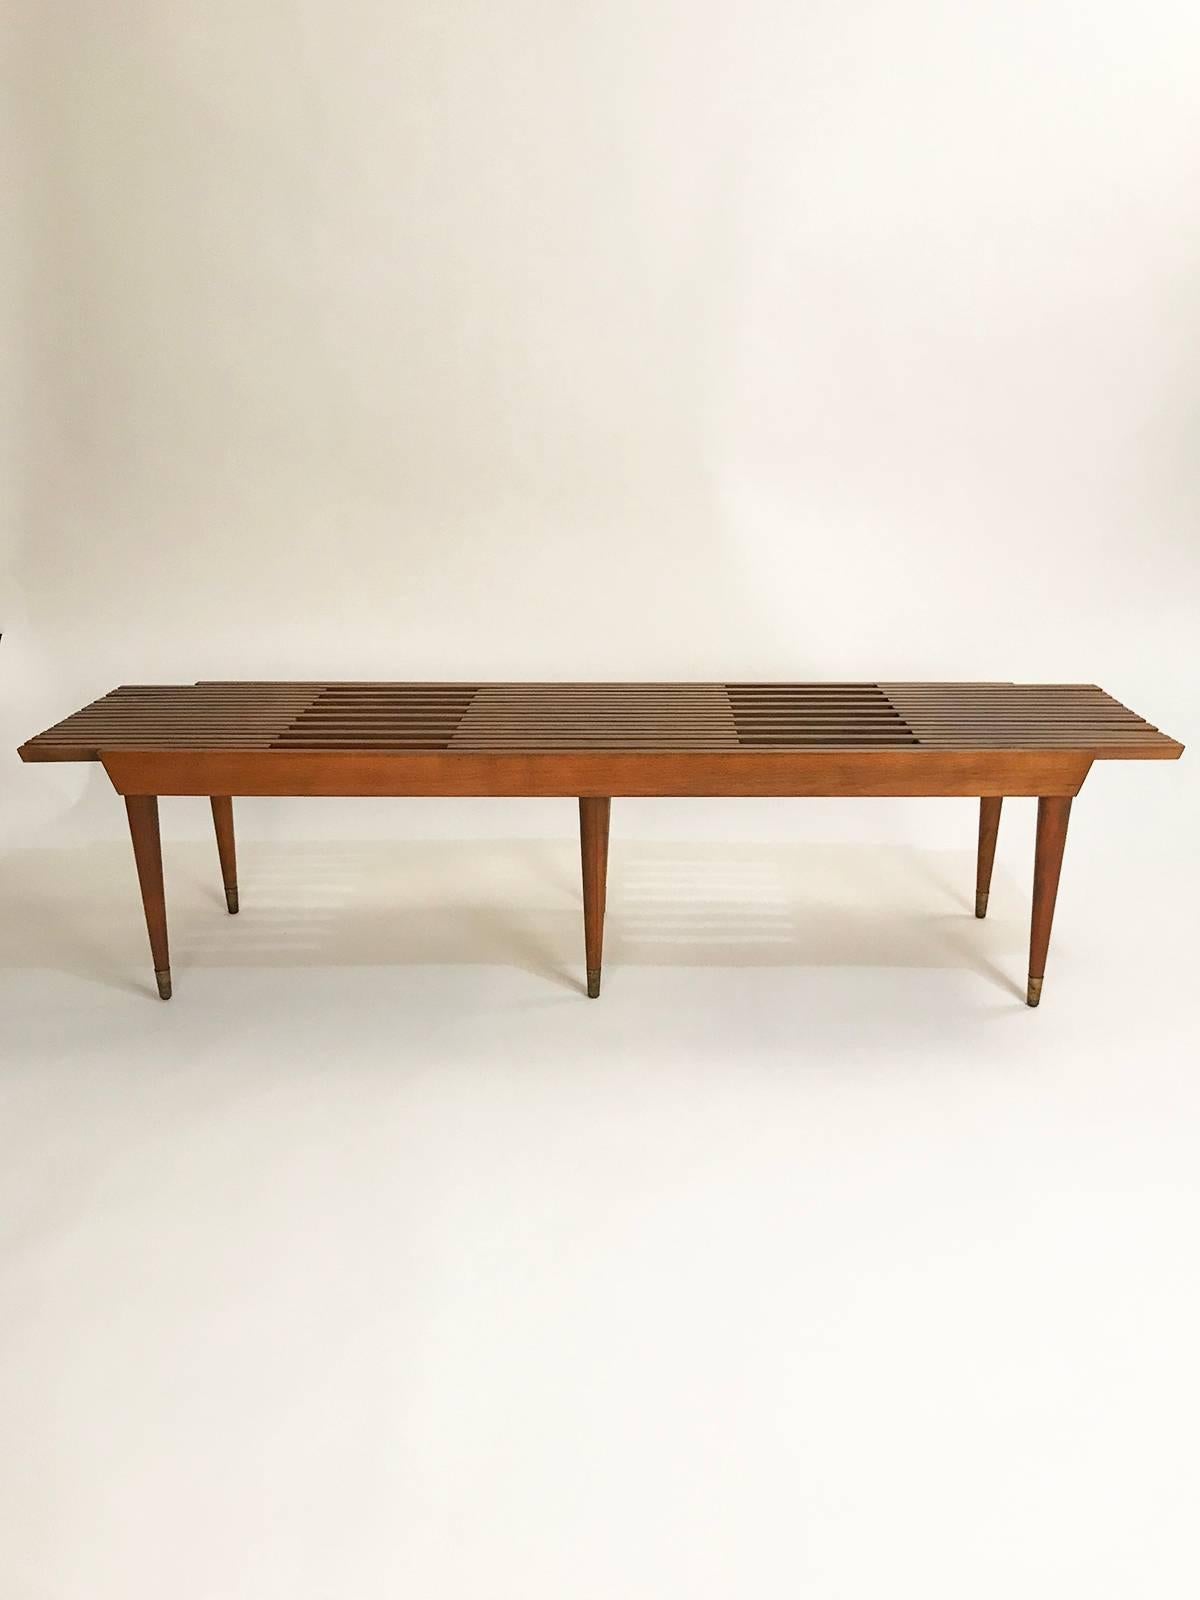 Wood Midcentury Expandable Slat Bench or Coffee Table